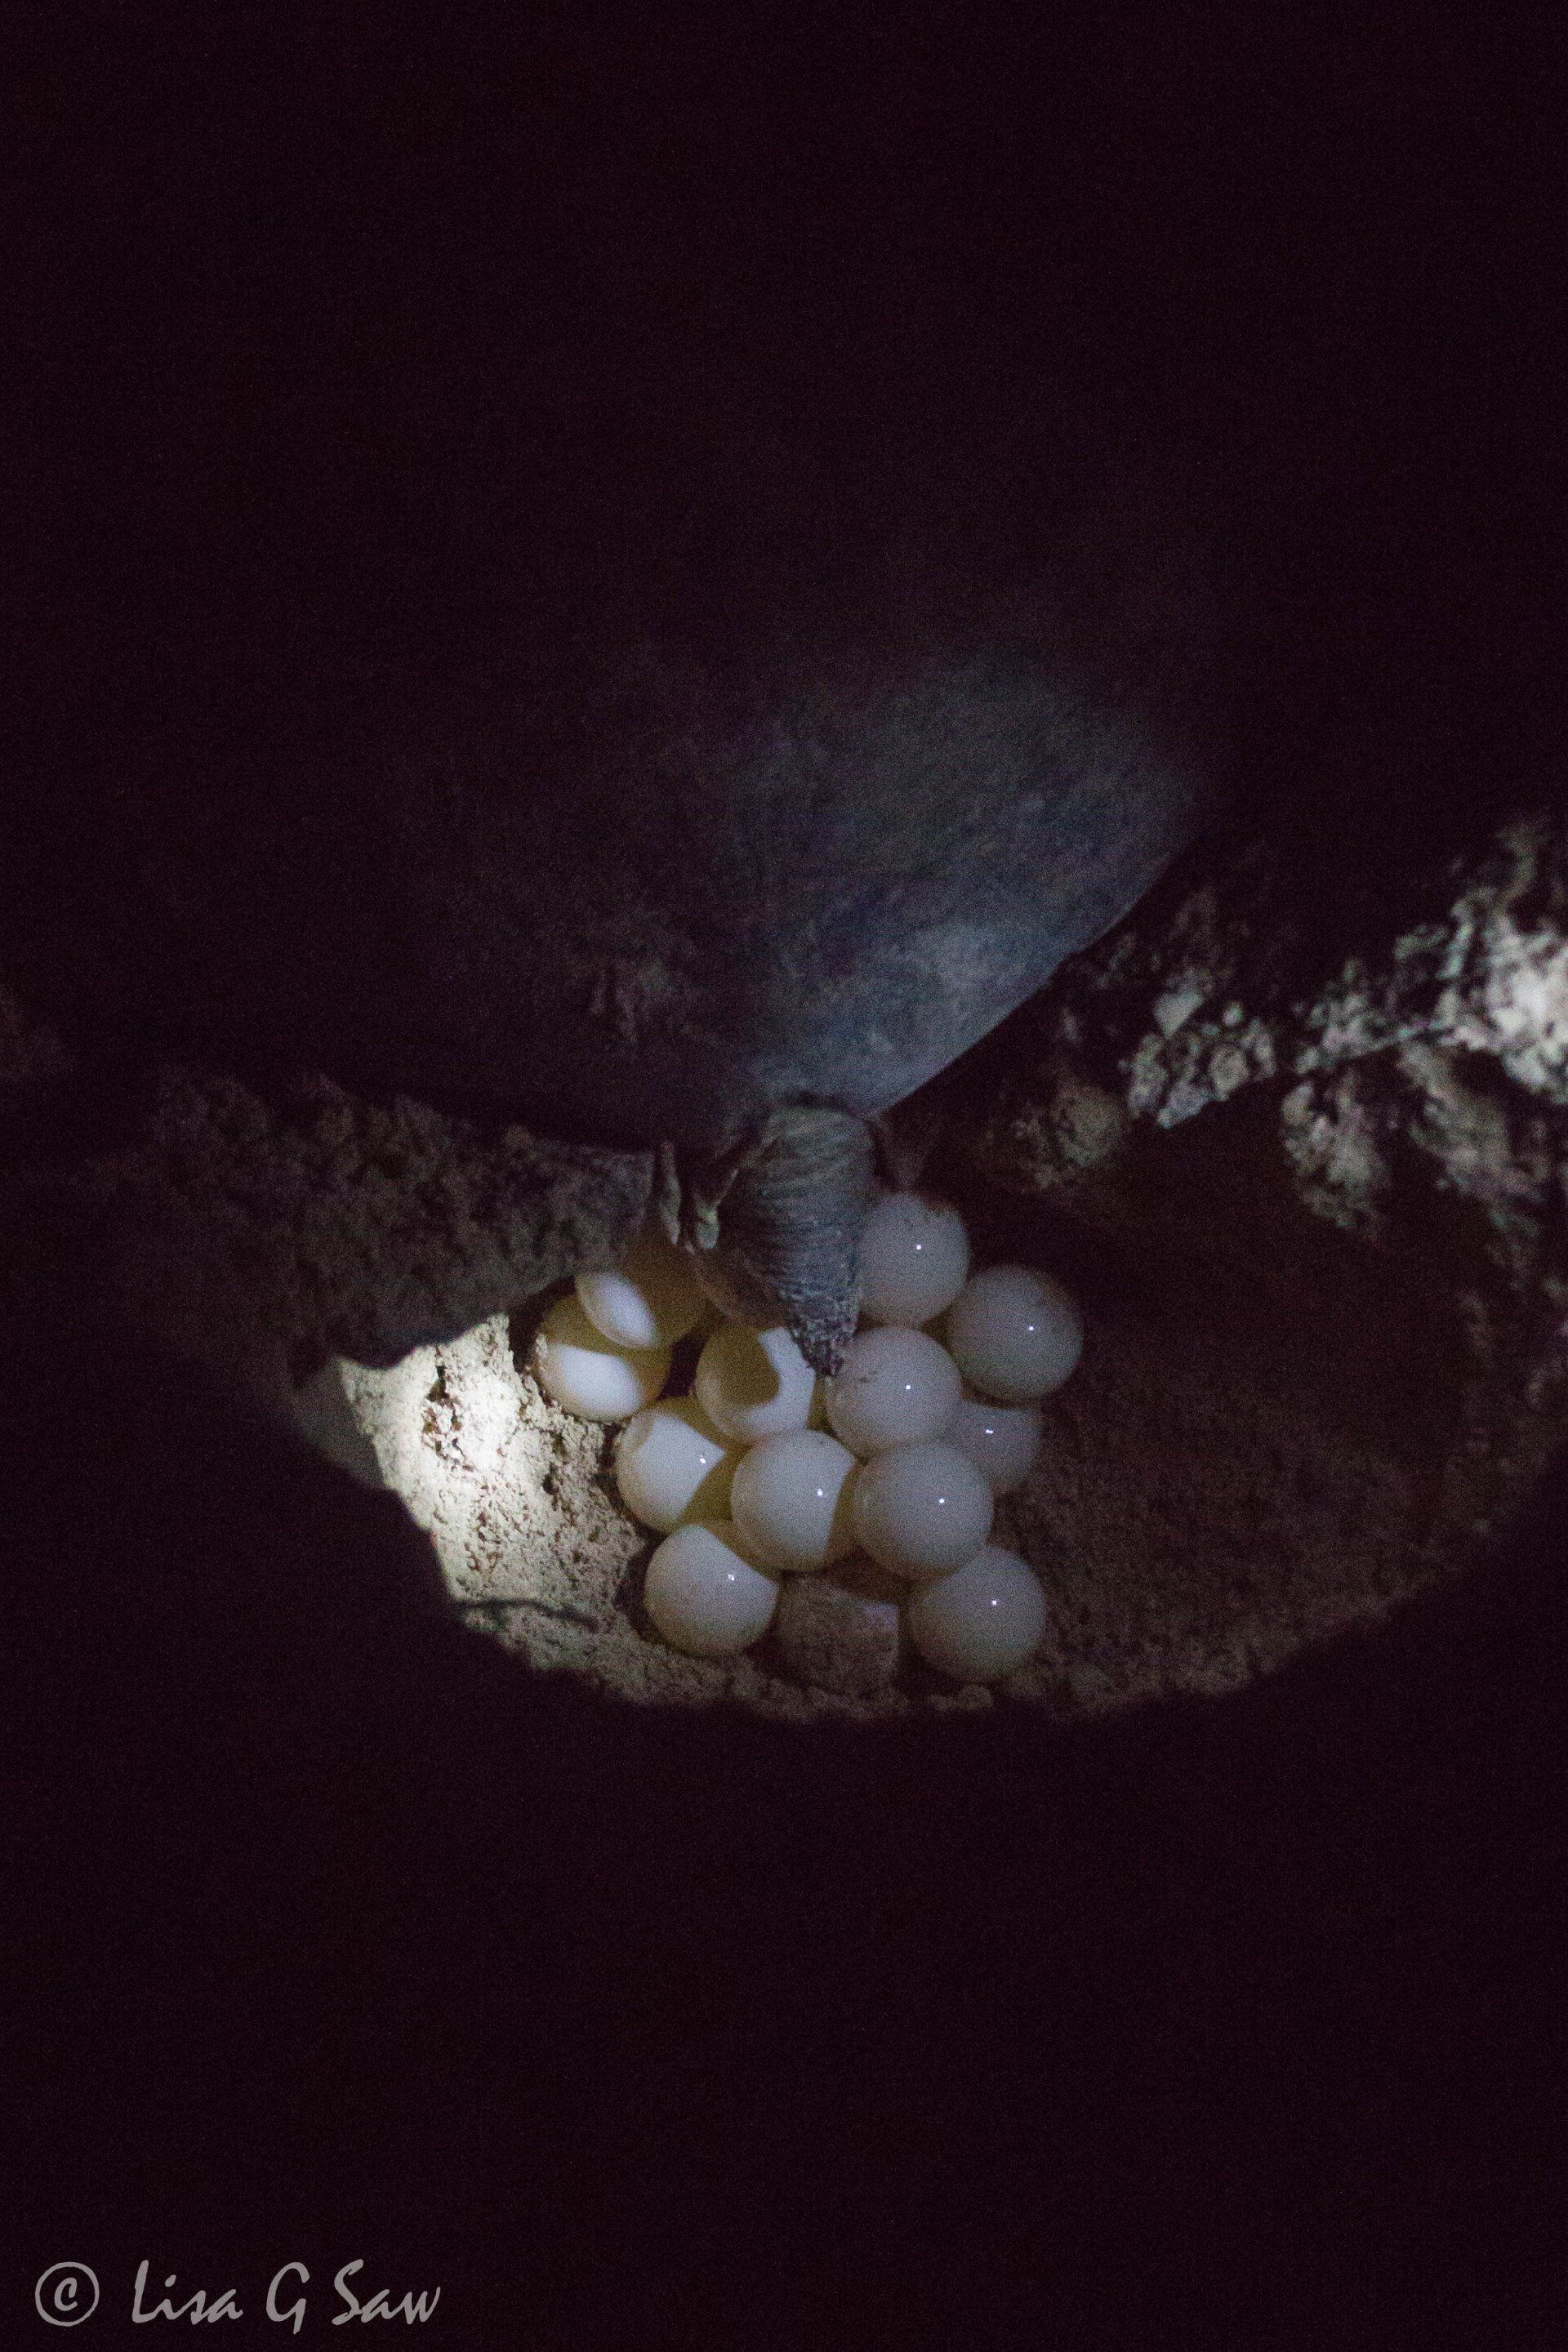 Green Sea Turtle laying eggs on the beach at night